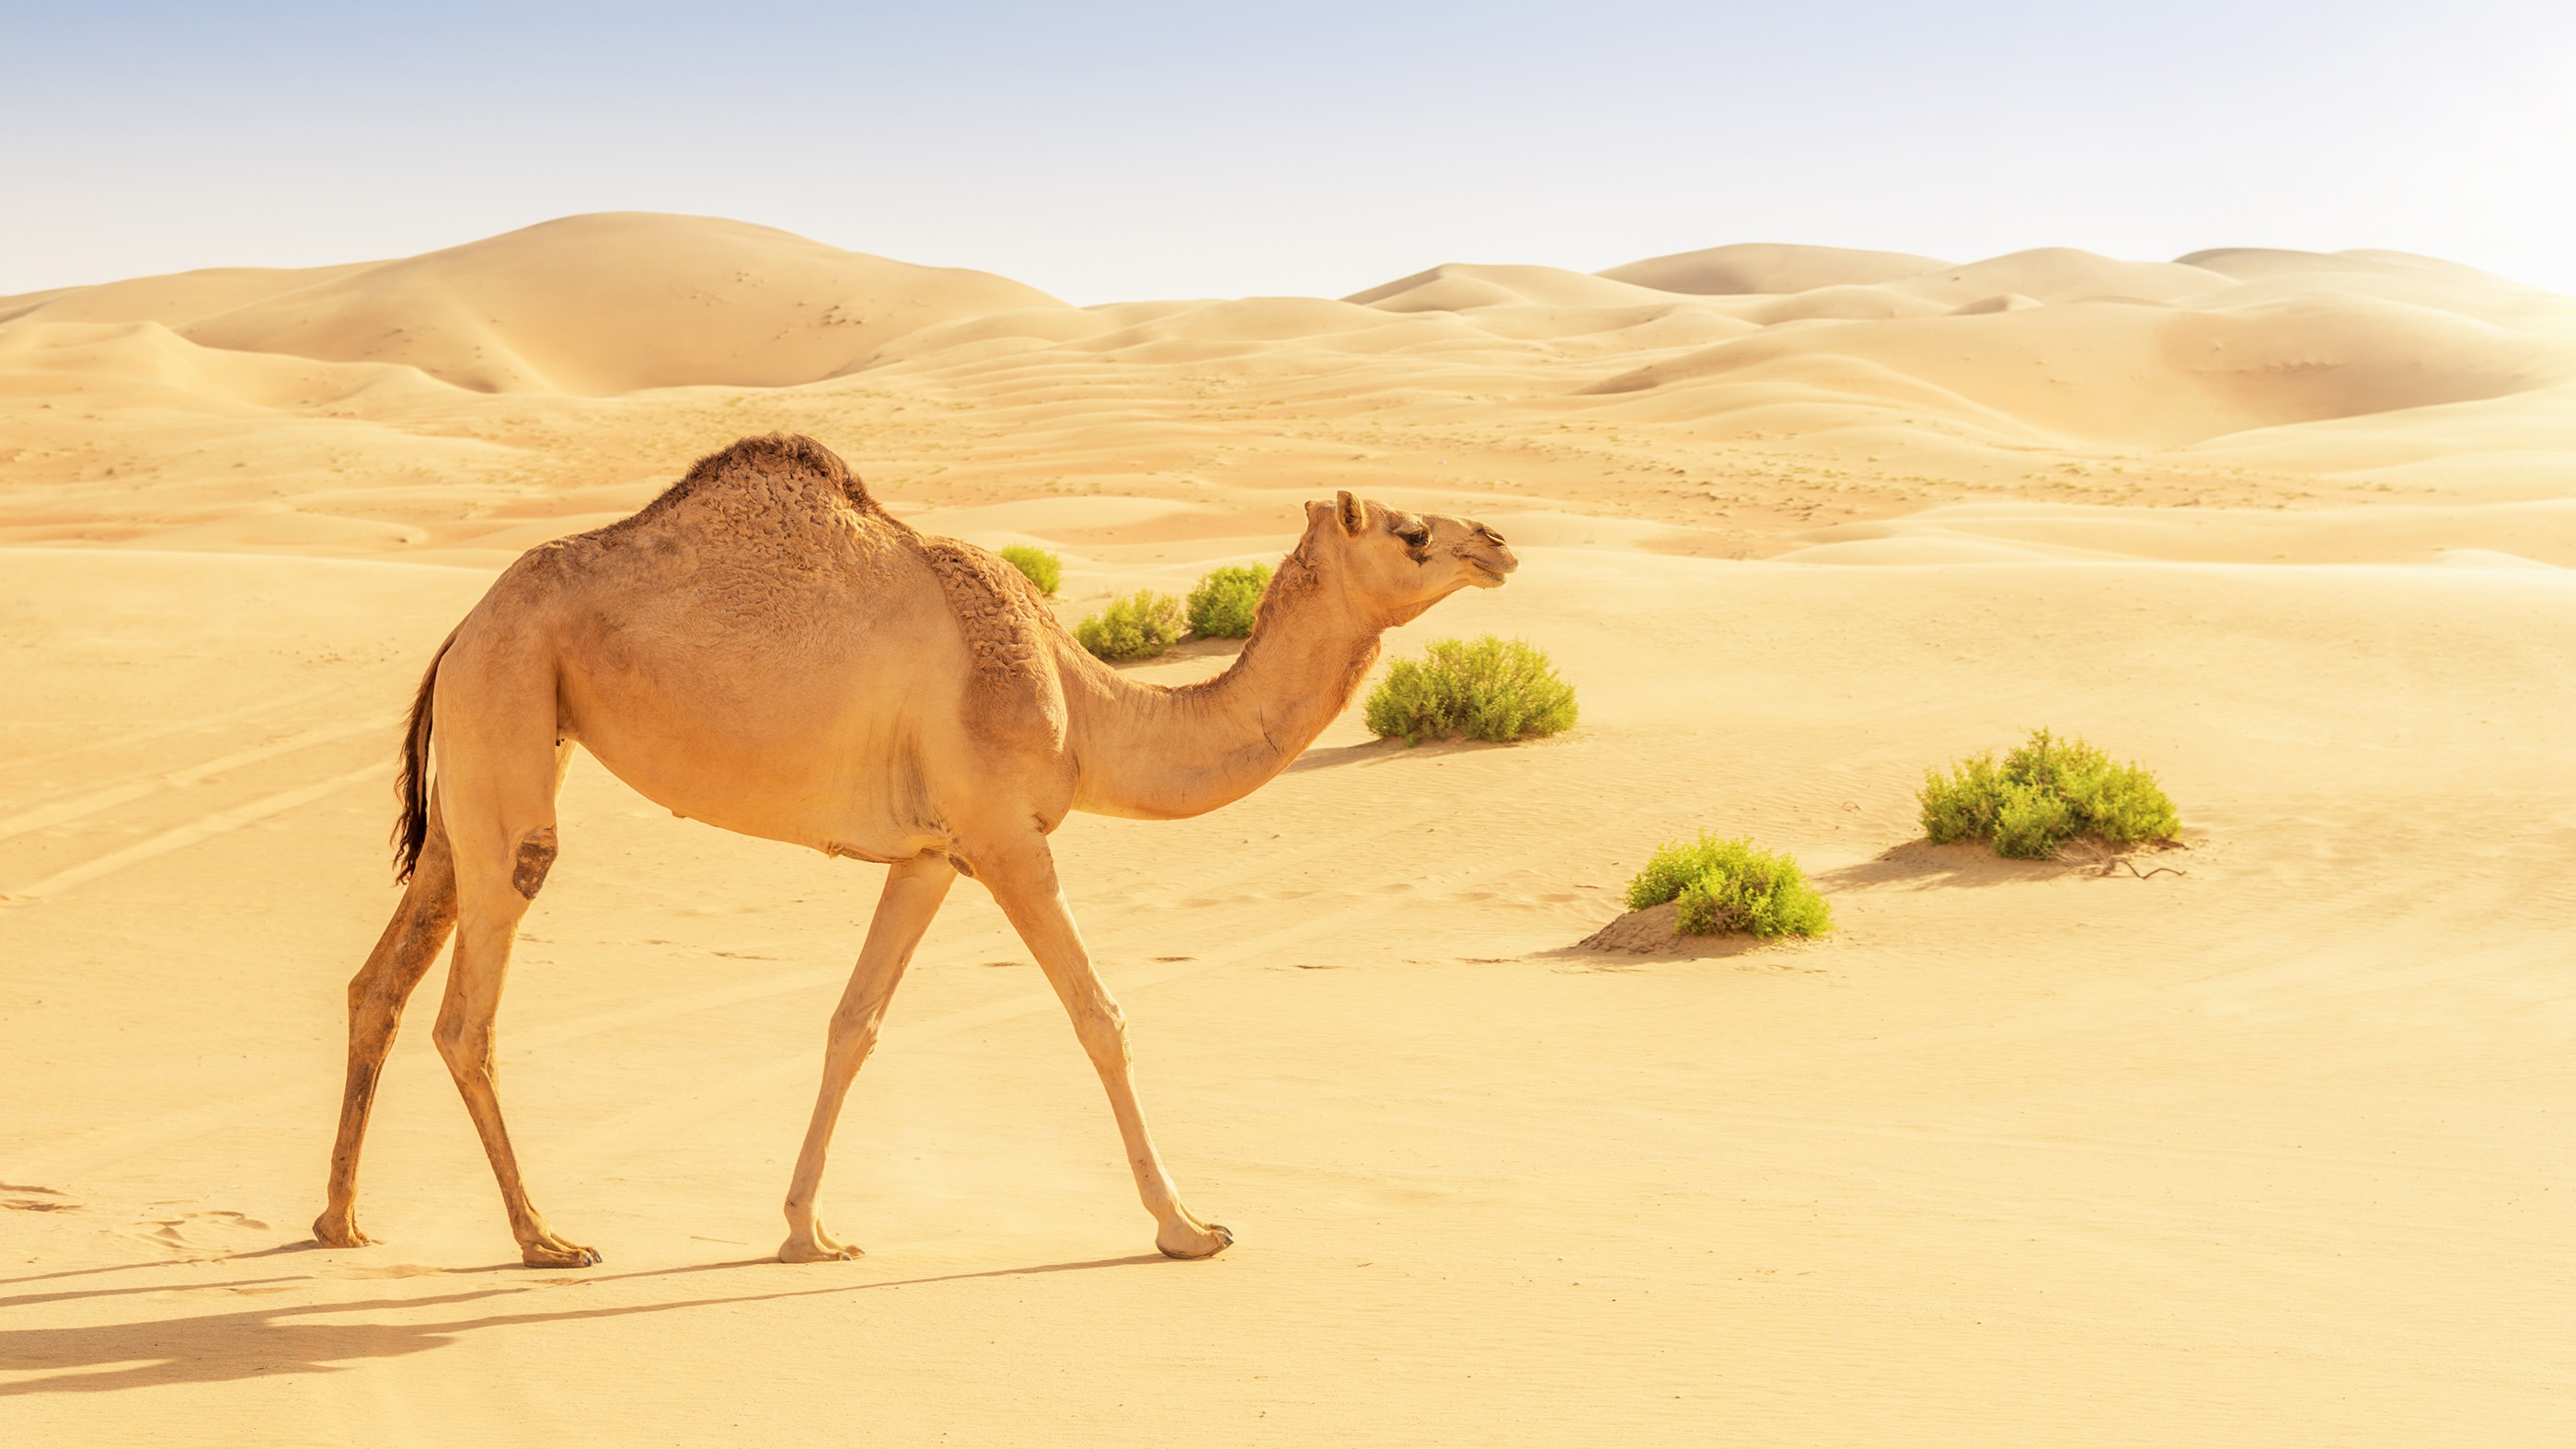 Australia exports sand and camels to the Middle East.